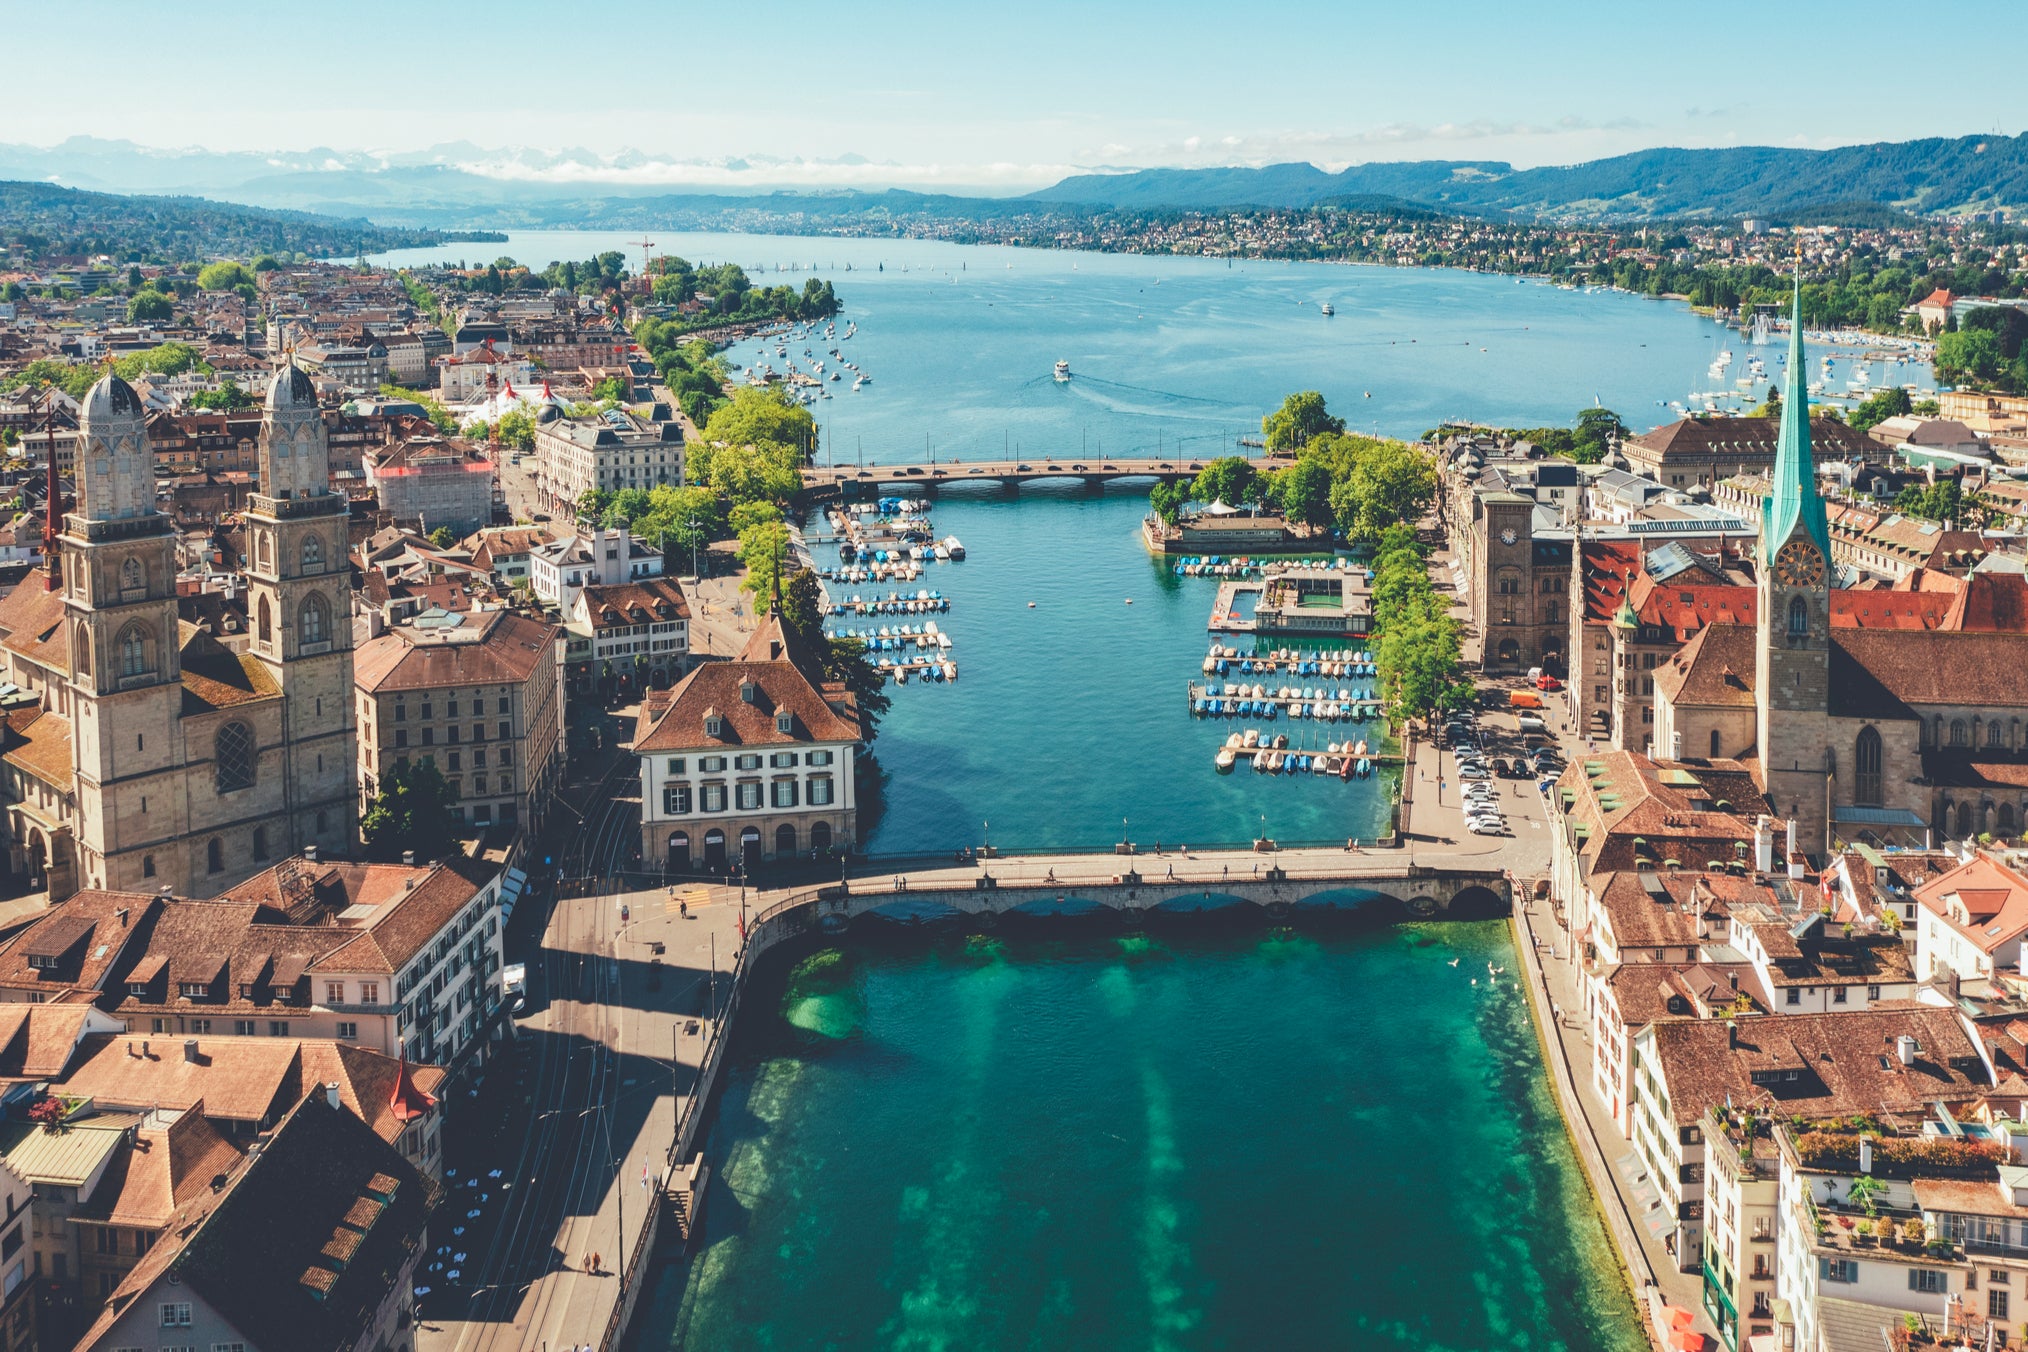 Sensible and slow? There’s actually lots more to Zurich